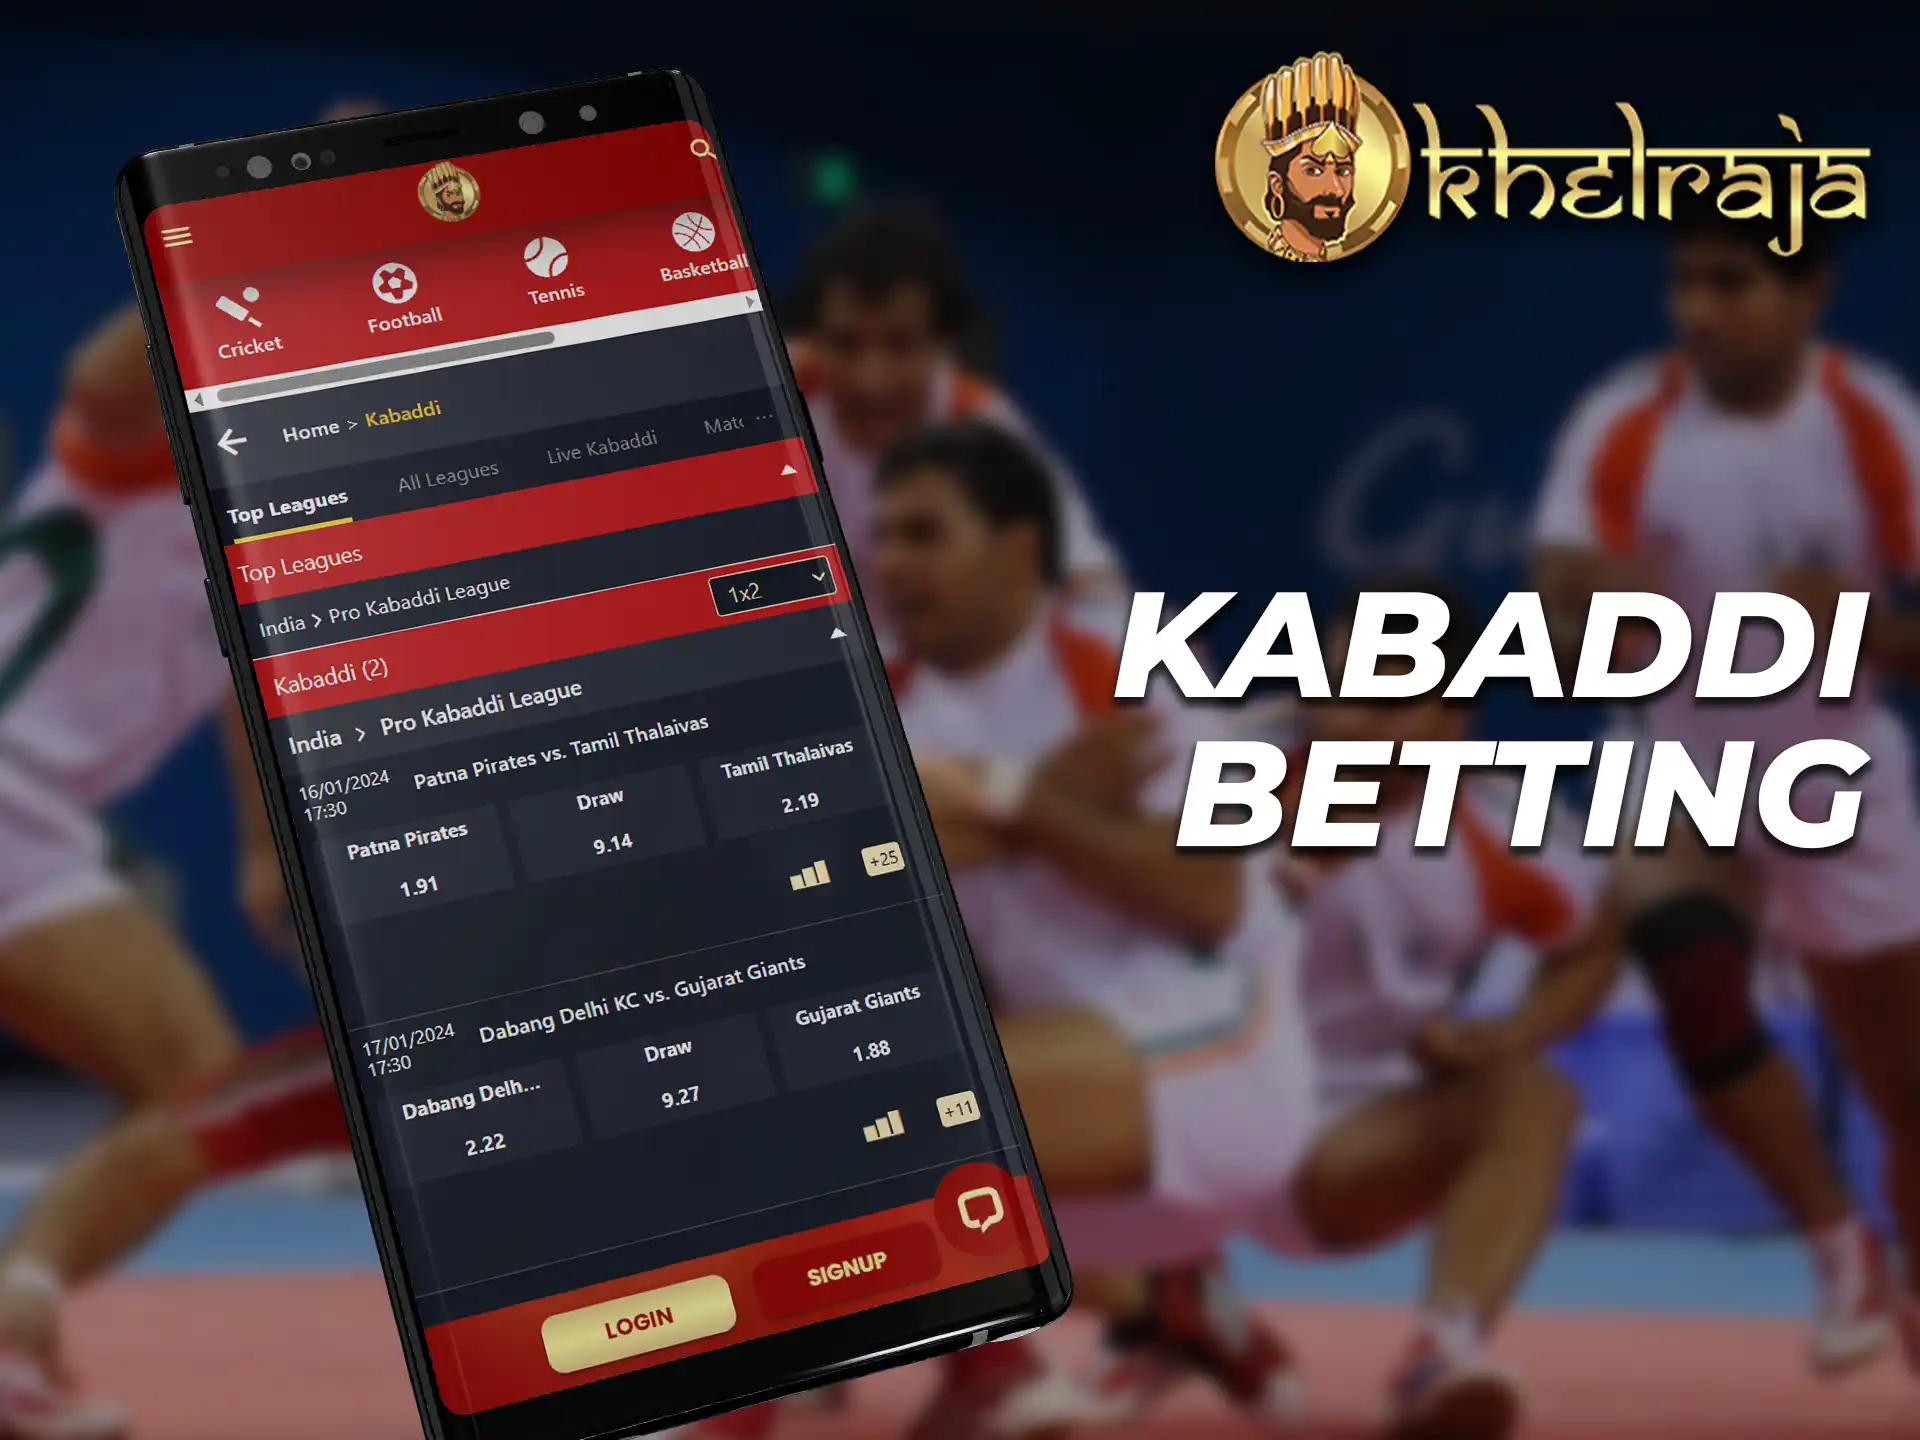 Place your bets on Kabaddi on the Khelraja app.